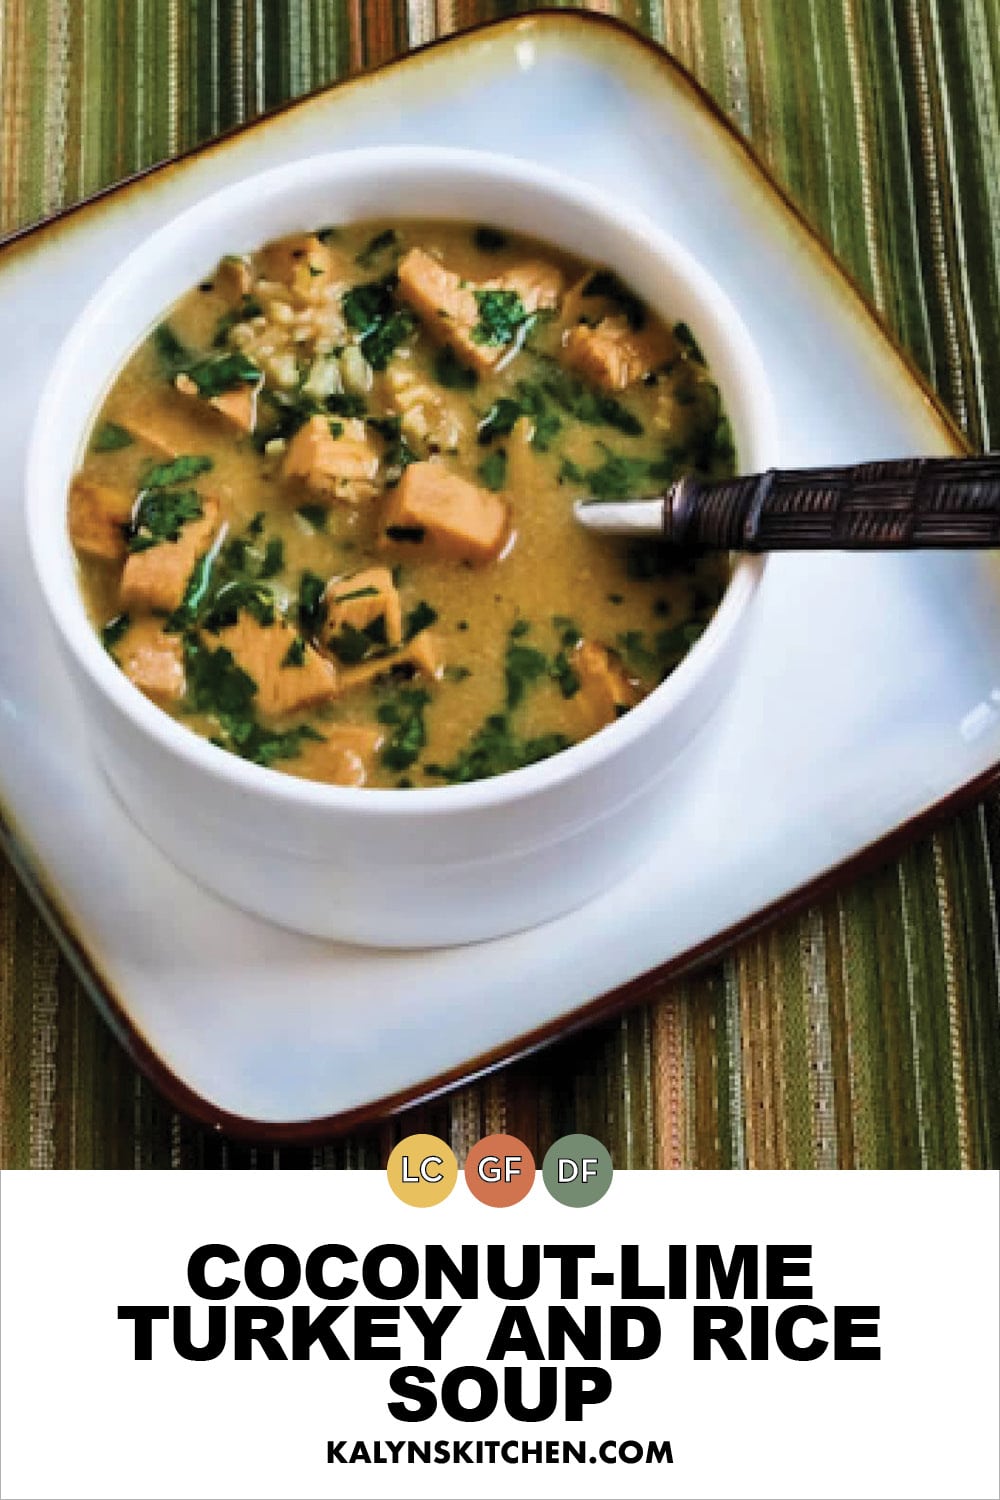 Pinterest image of Coconut-Lime Turkey and Rice Soup